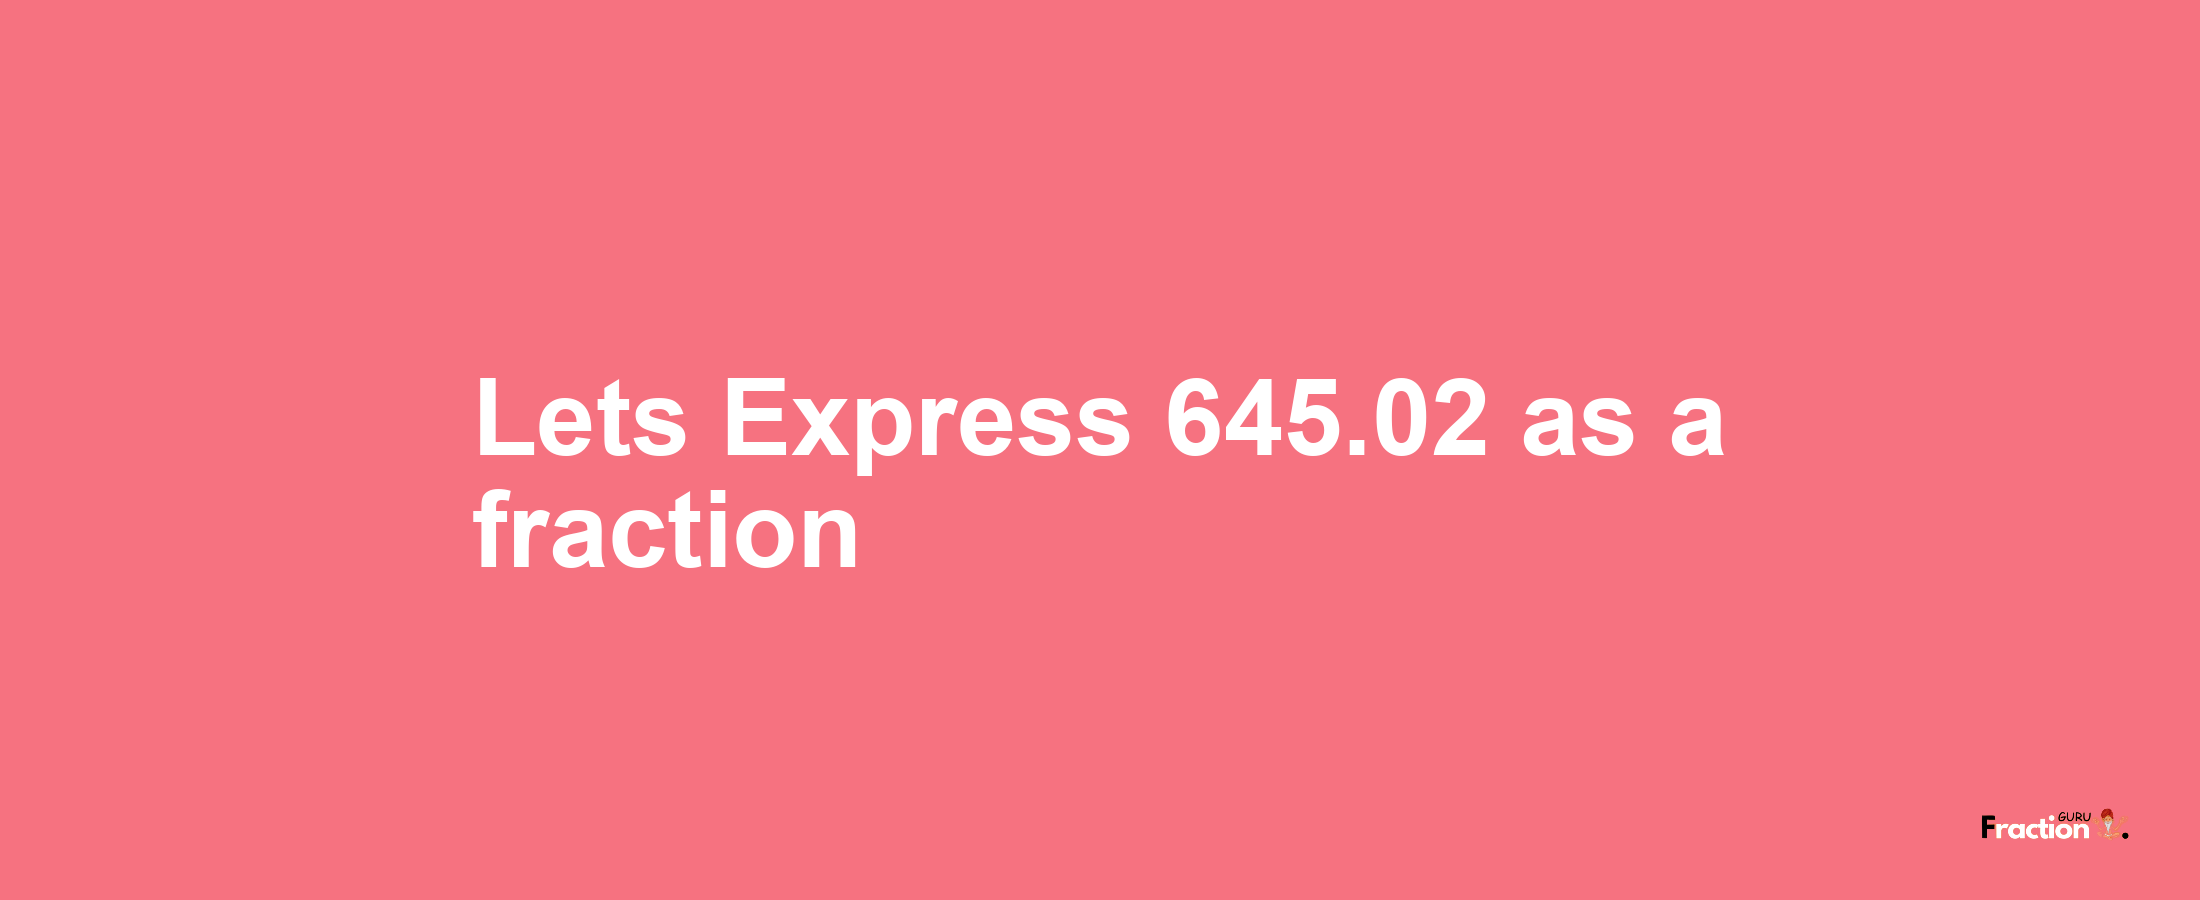 Lets Express 645.02 as afraction